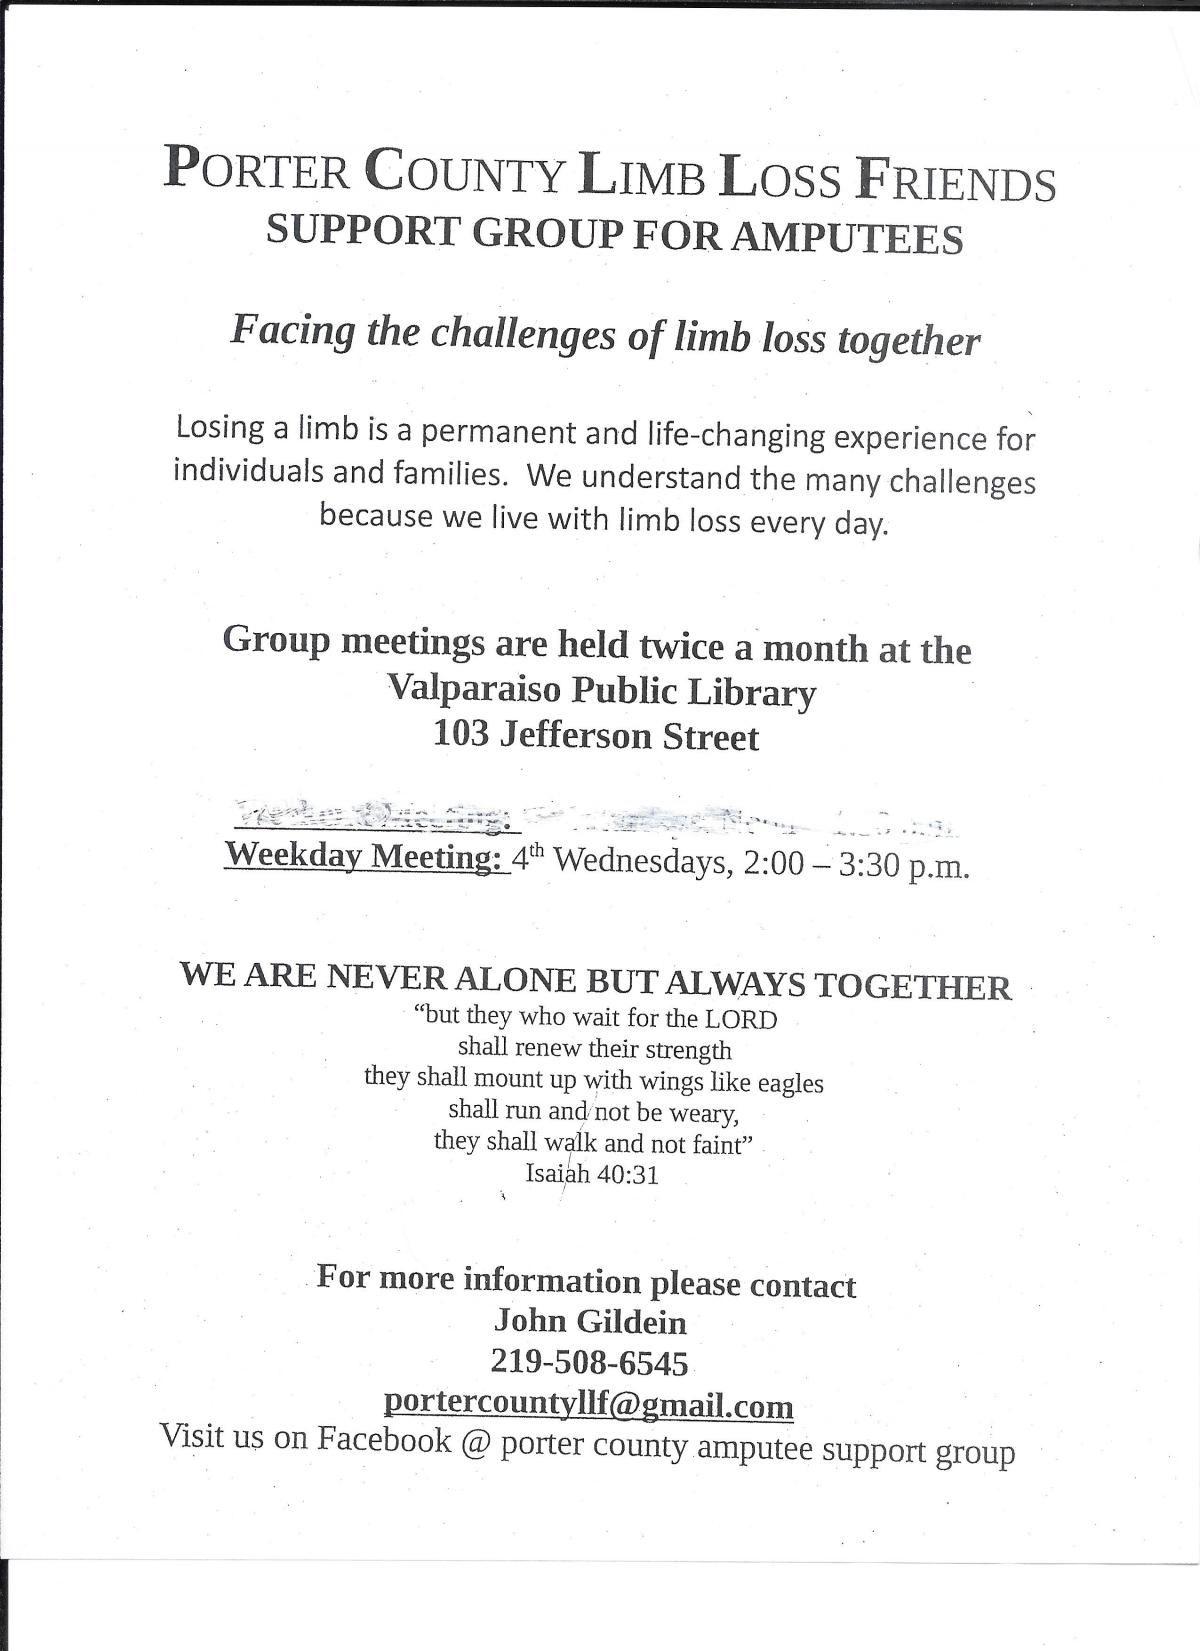 Porter County Amputee Support Group